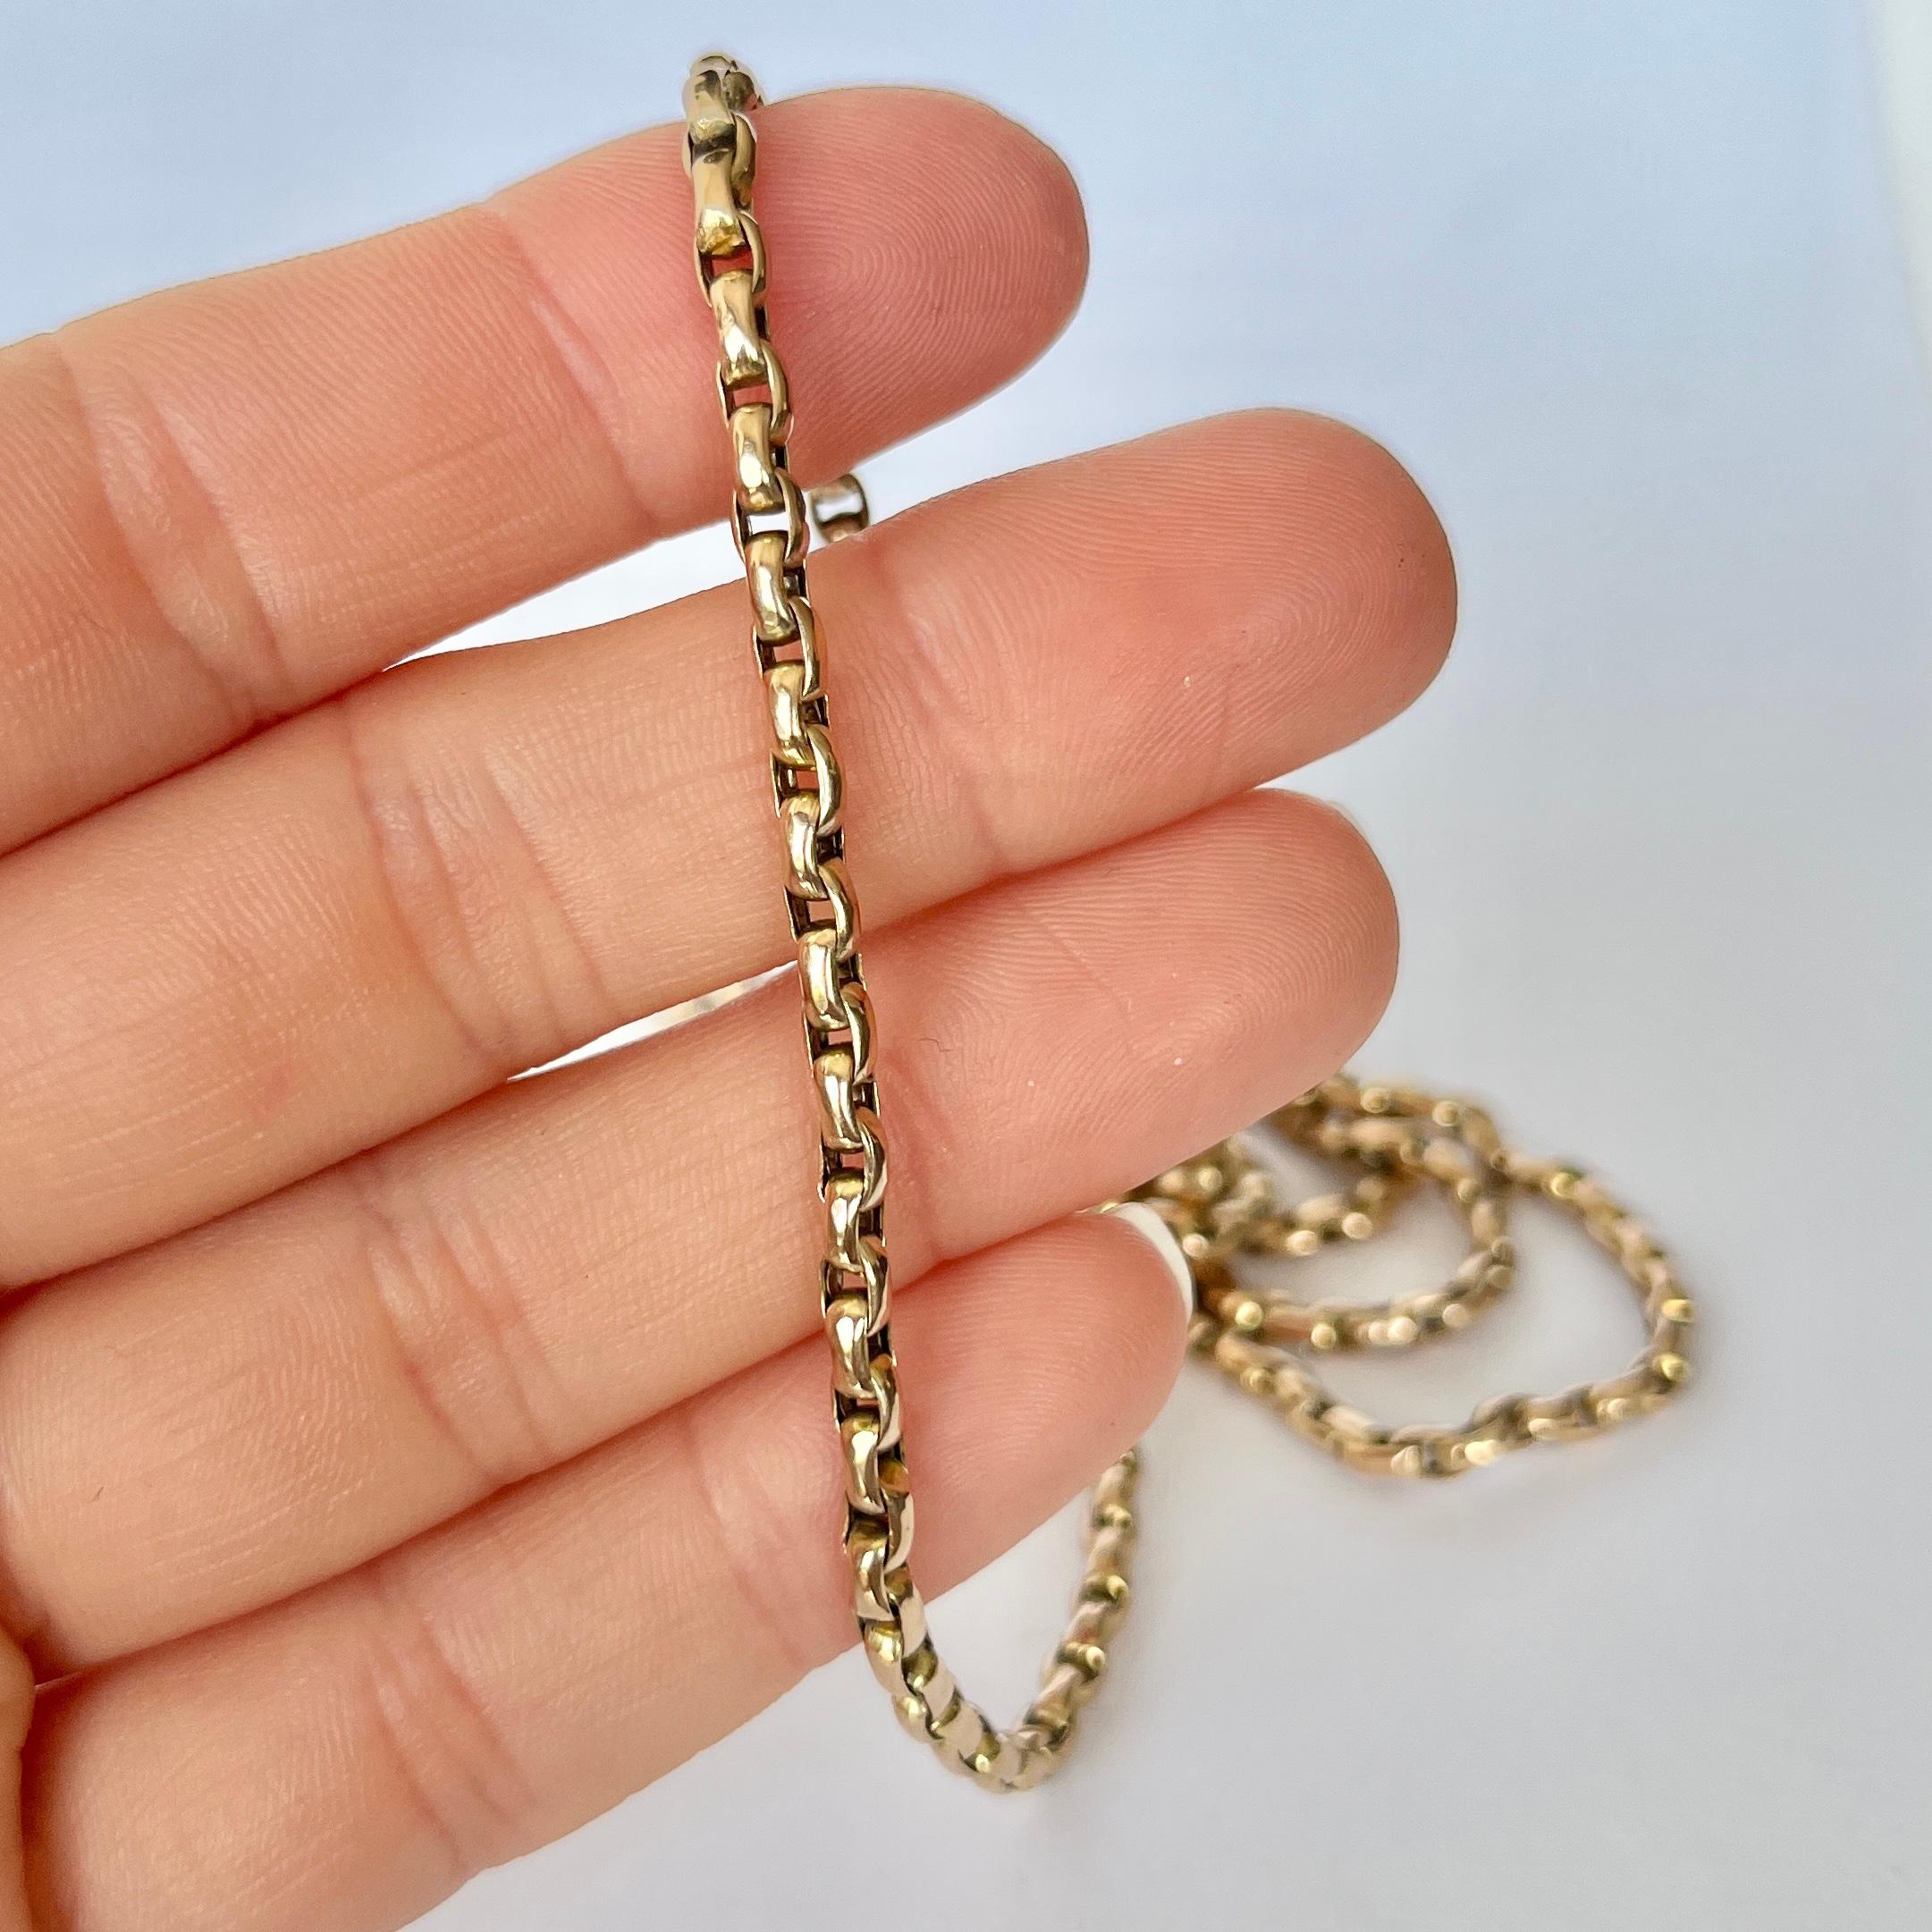 Longuard chains are so versatile and can be worn in so many ways! This chain is modelled in 9ct gold and there is also a dog clip.

Length: 147cm
Width: 2.5mm

Weight: 32.9g